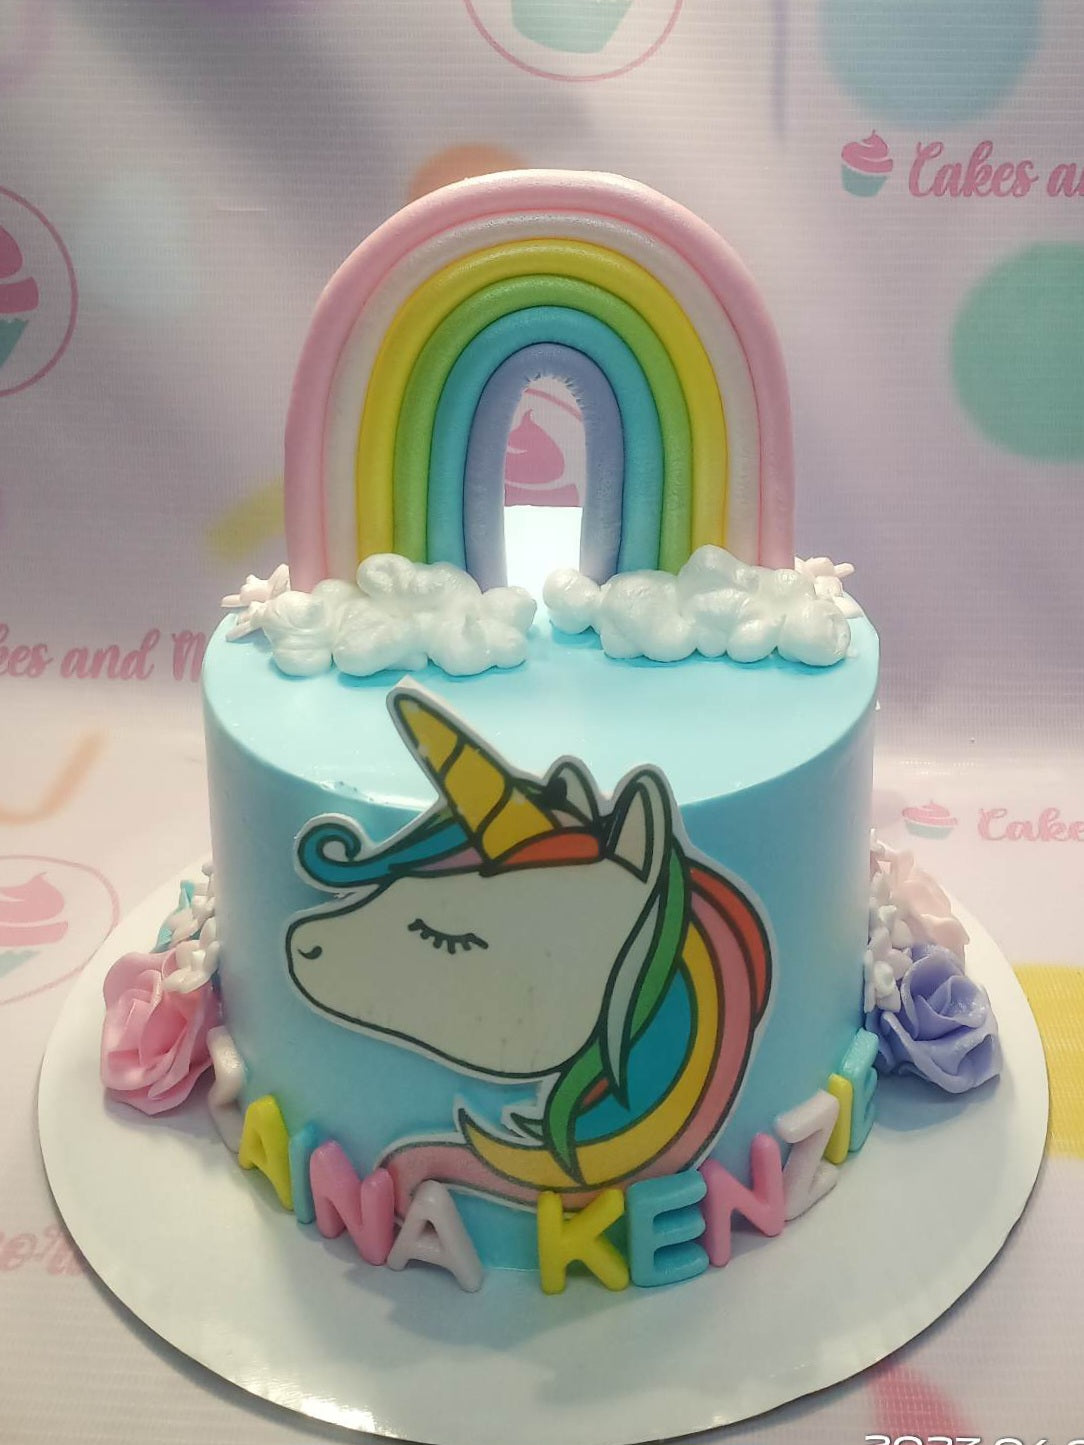 Theme

This custom decorated cake is the perfect choice for a child's birthday. Featuring a unicorn theme, the cake is adorned with a colorful rainbow, a pony, and various candies to make it a fun and vibrant display. Bring your child's birthday to life with this unique and customizable cake.